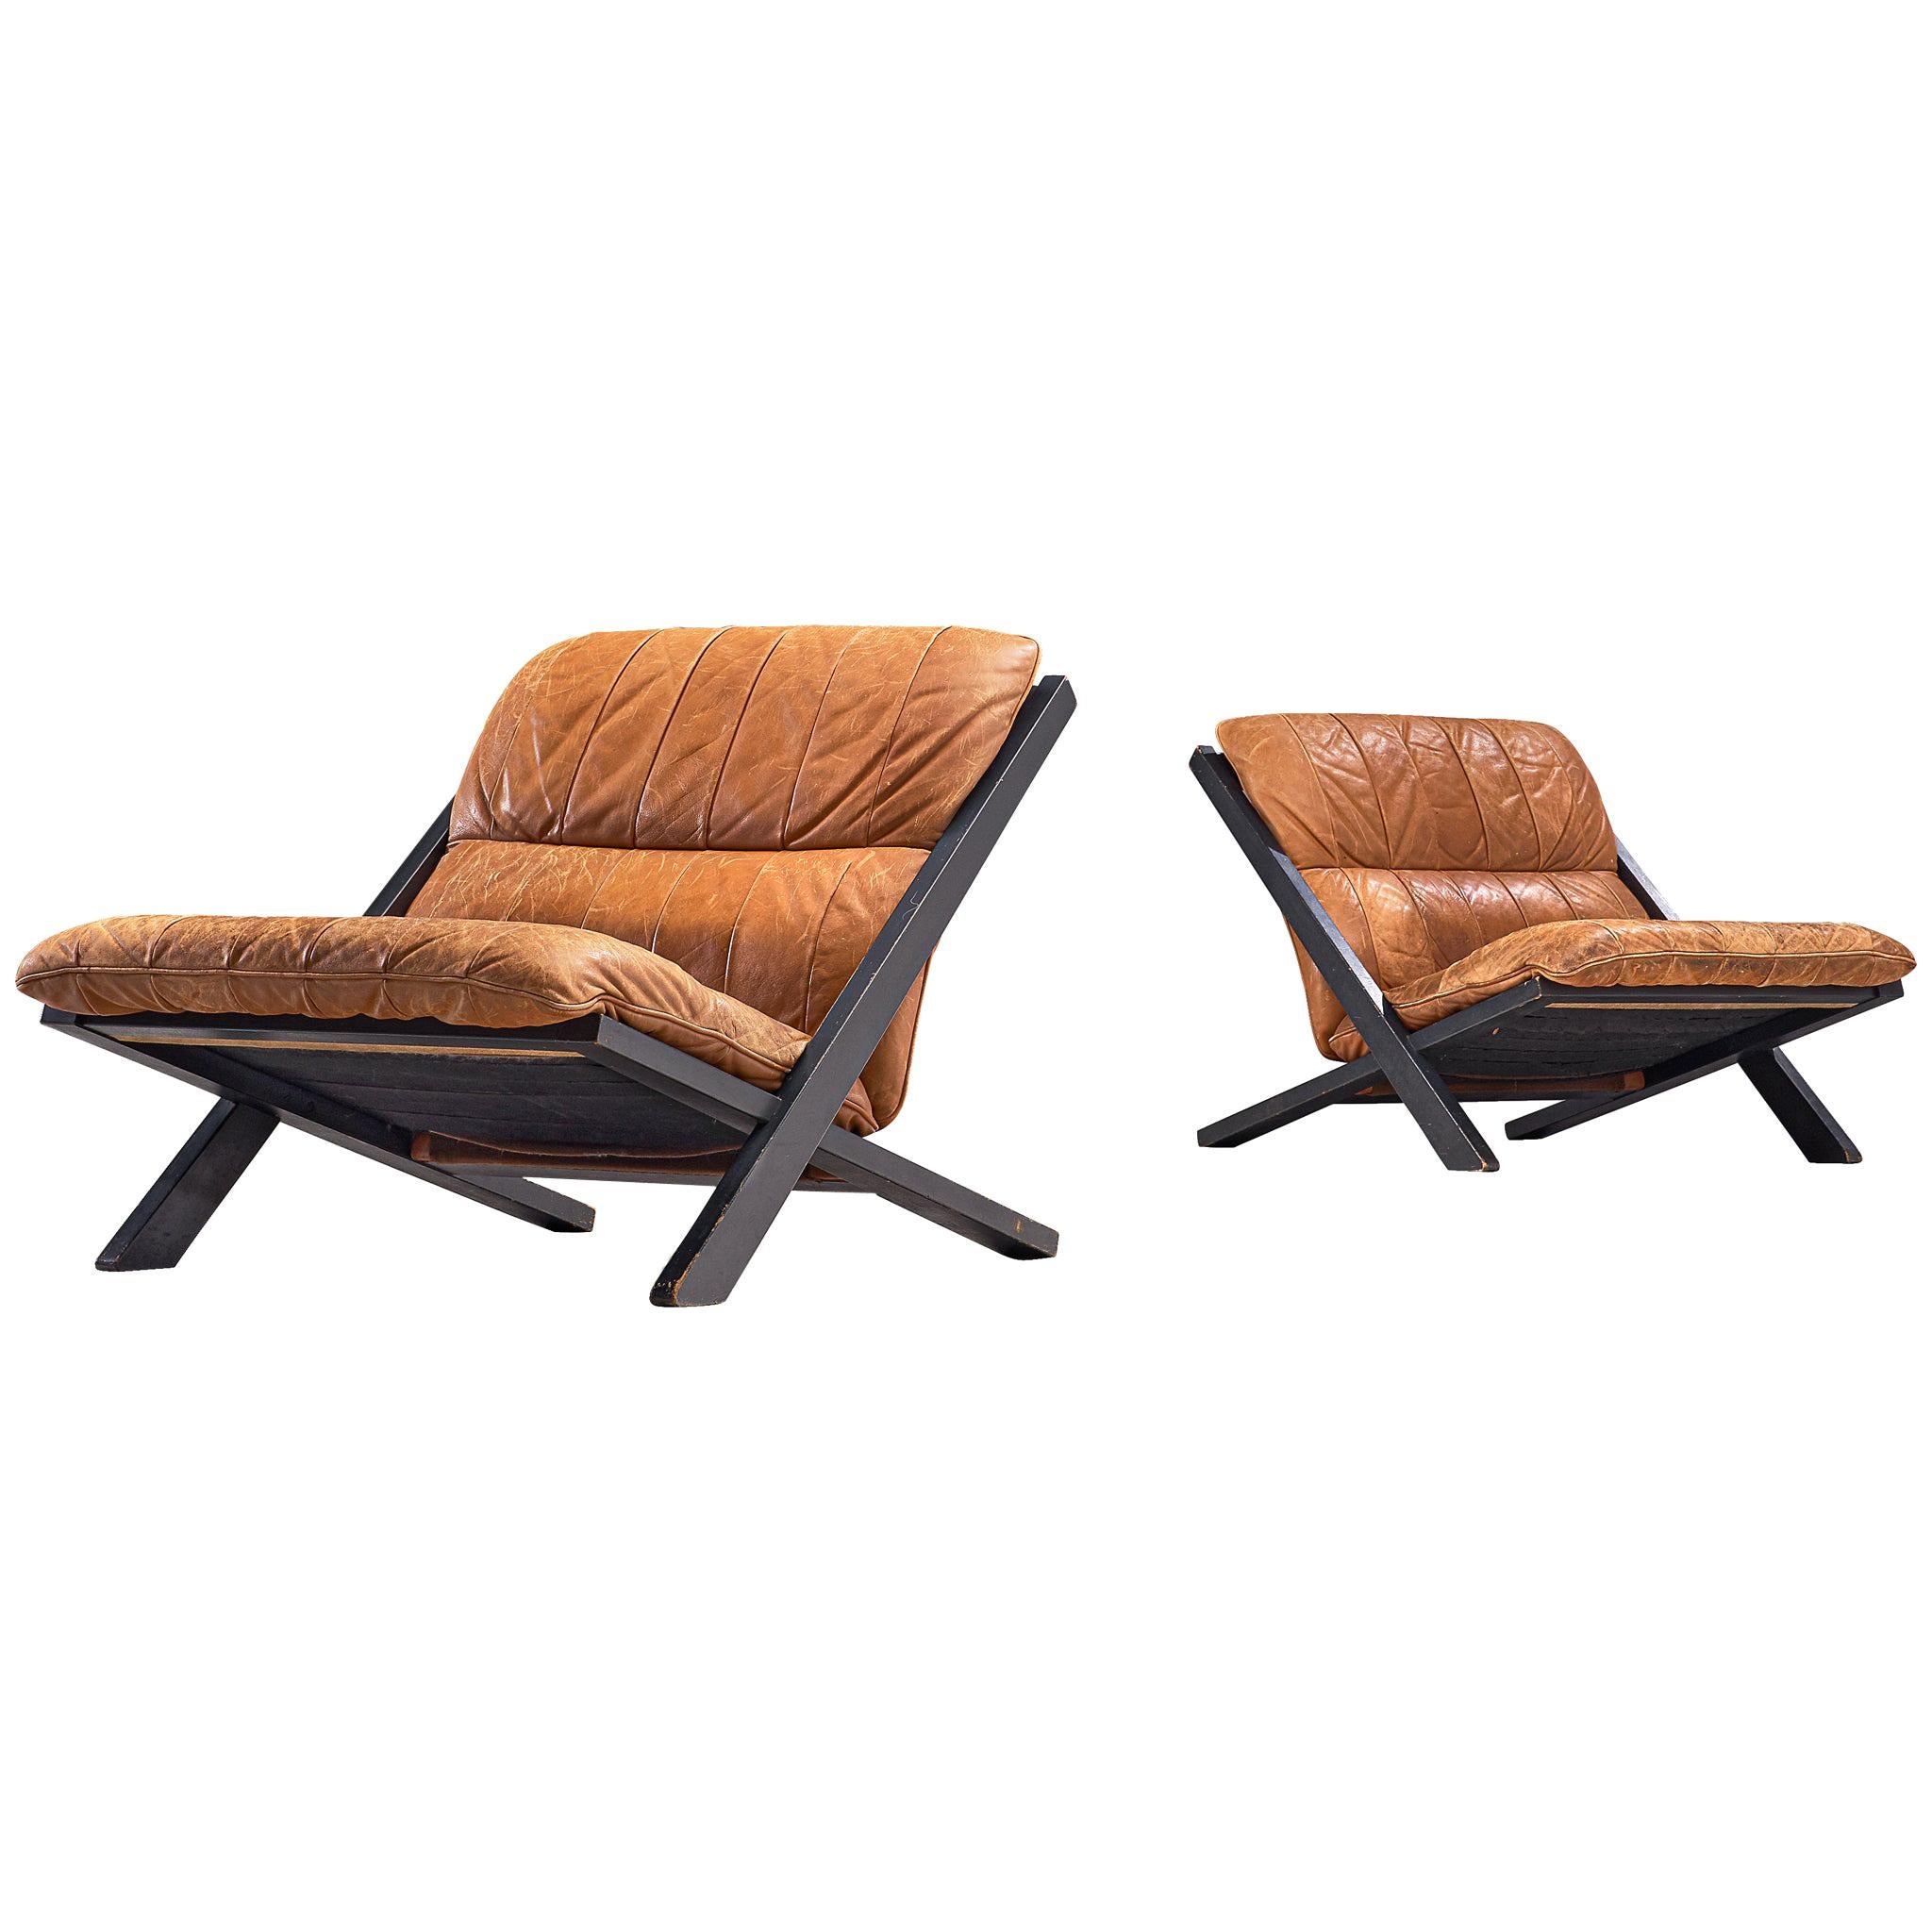 Pair of Lounge Chairs in Patinated Cognac Leather for De Sede